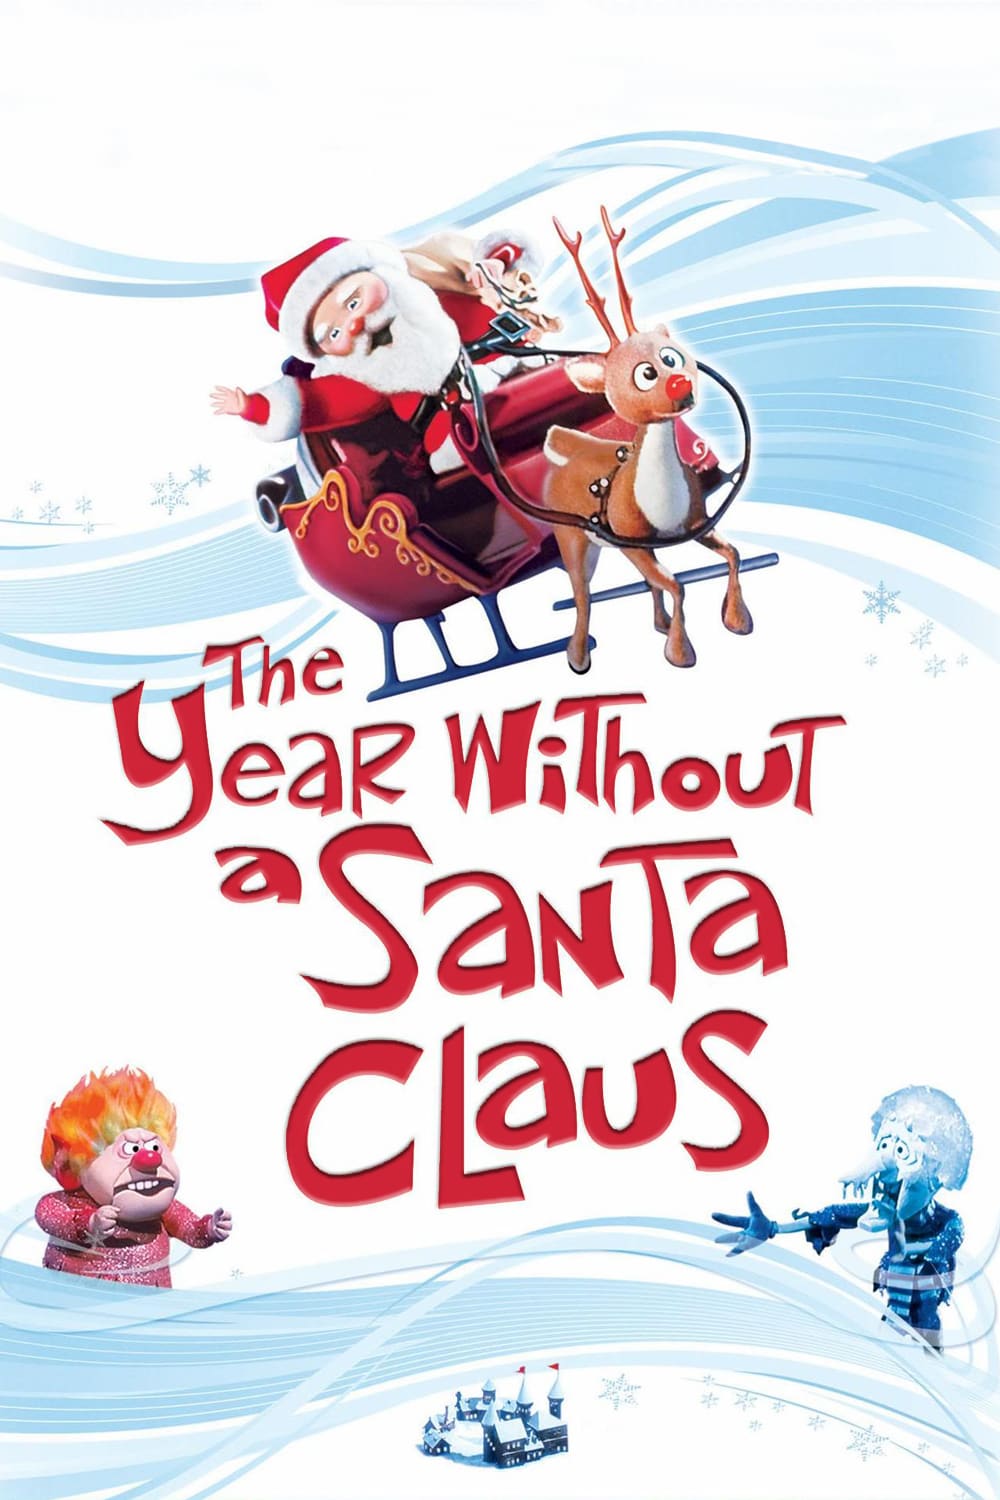 Poster for the movie "The Year Without a Santa Claus"